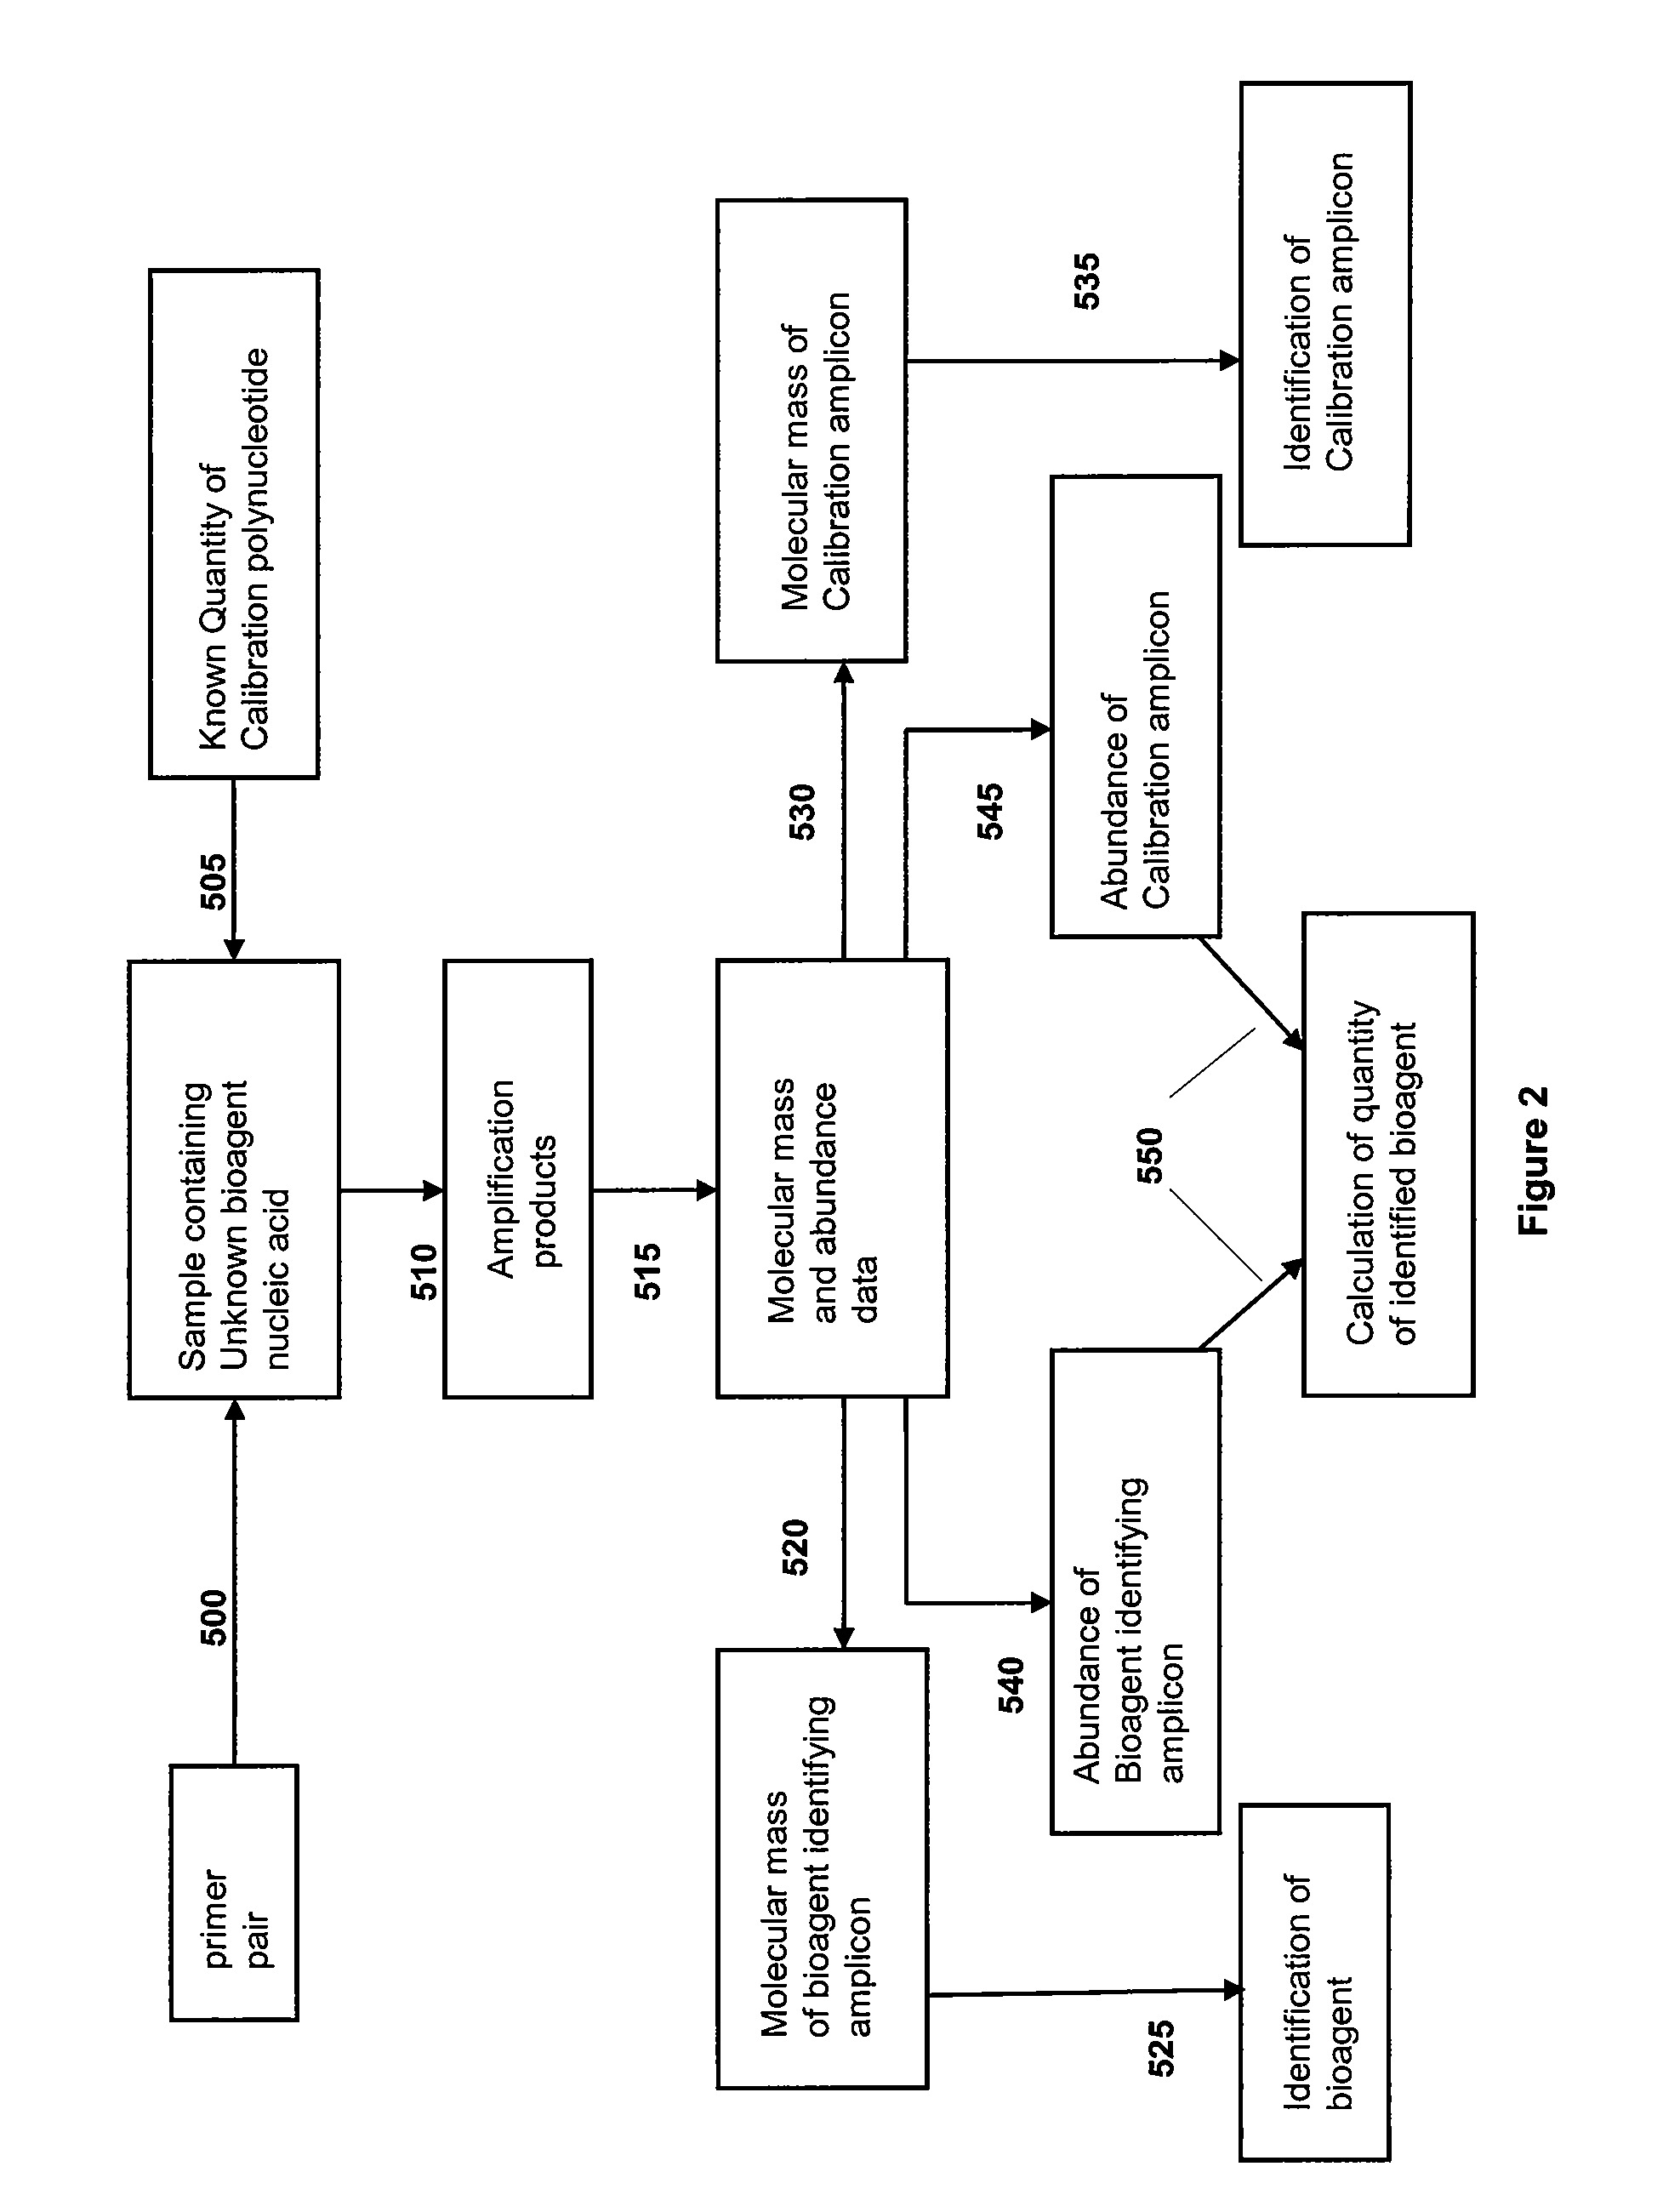 Methods for identification of sepsis-causing bacteria